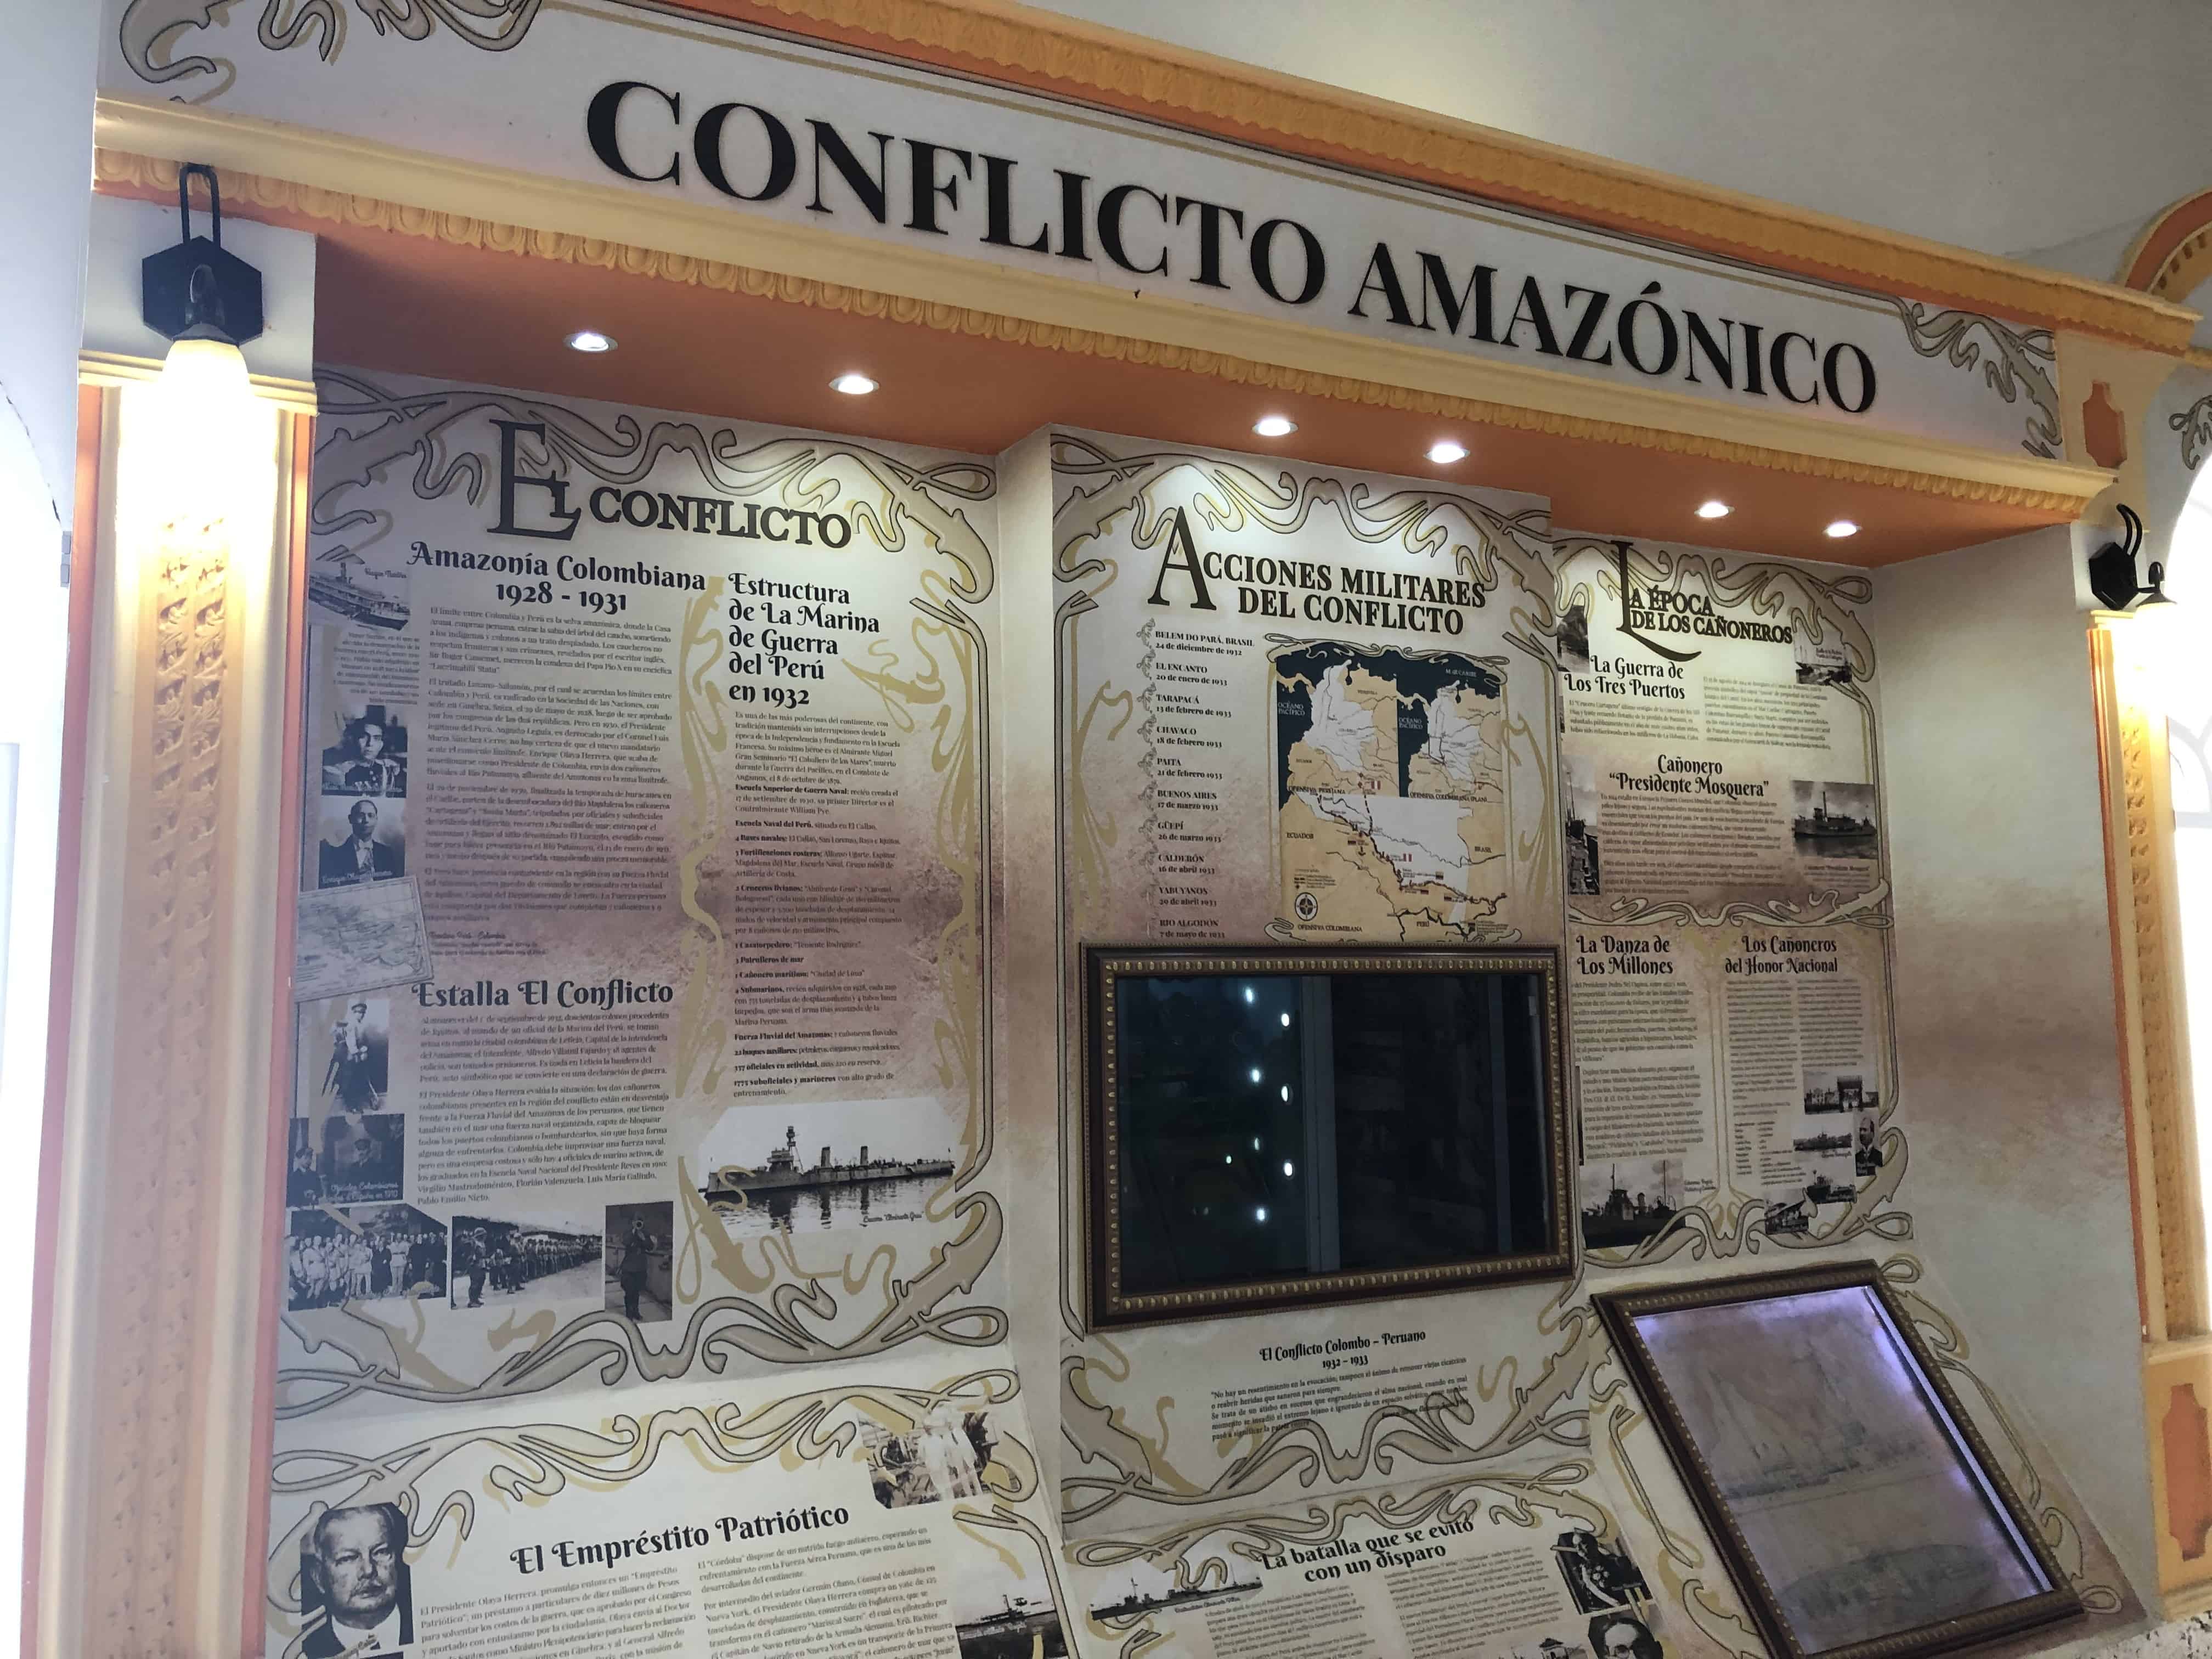 Conflict in the Amazon at the Caribbean Naval Museum in Cartagena, Colombia